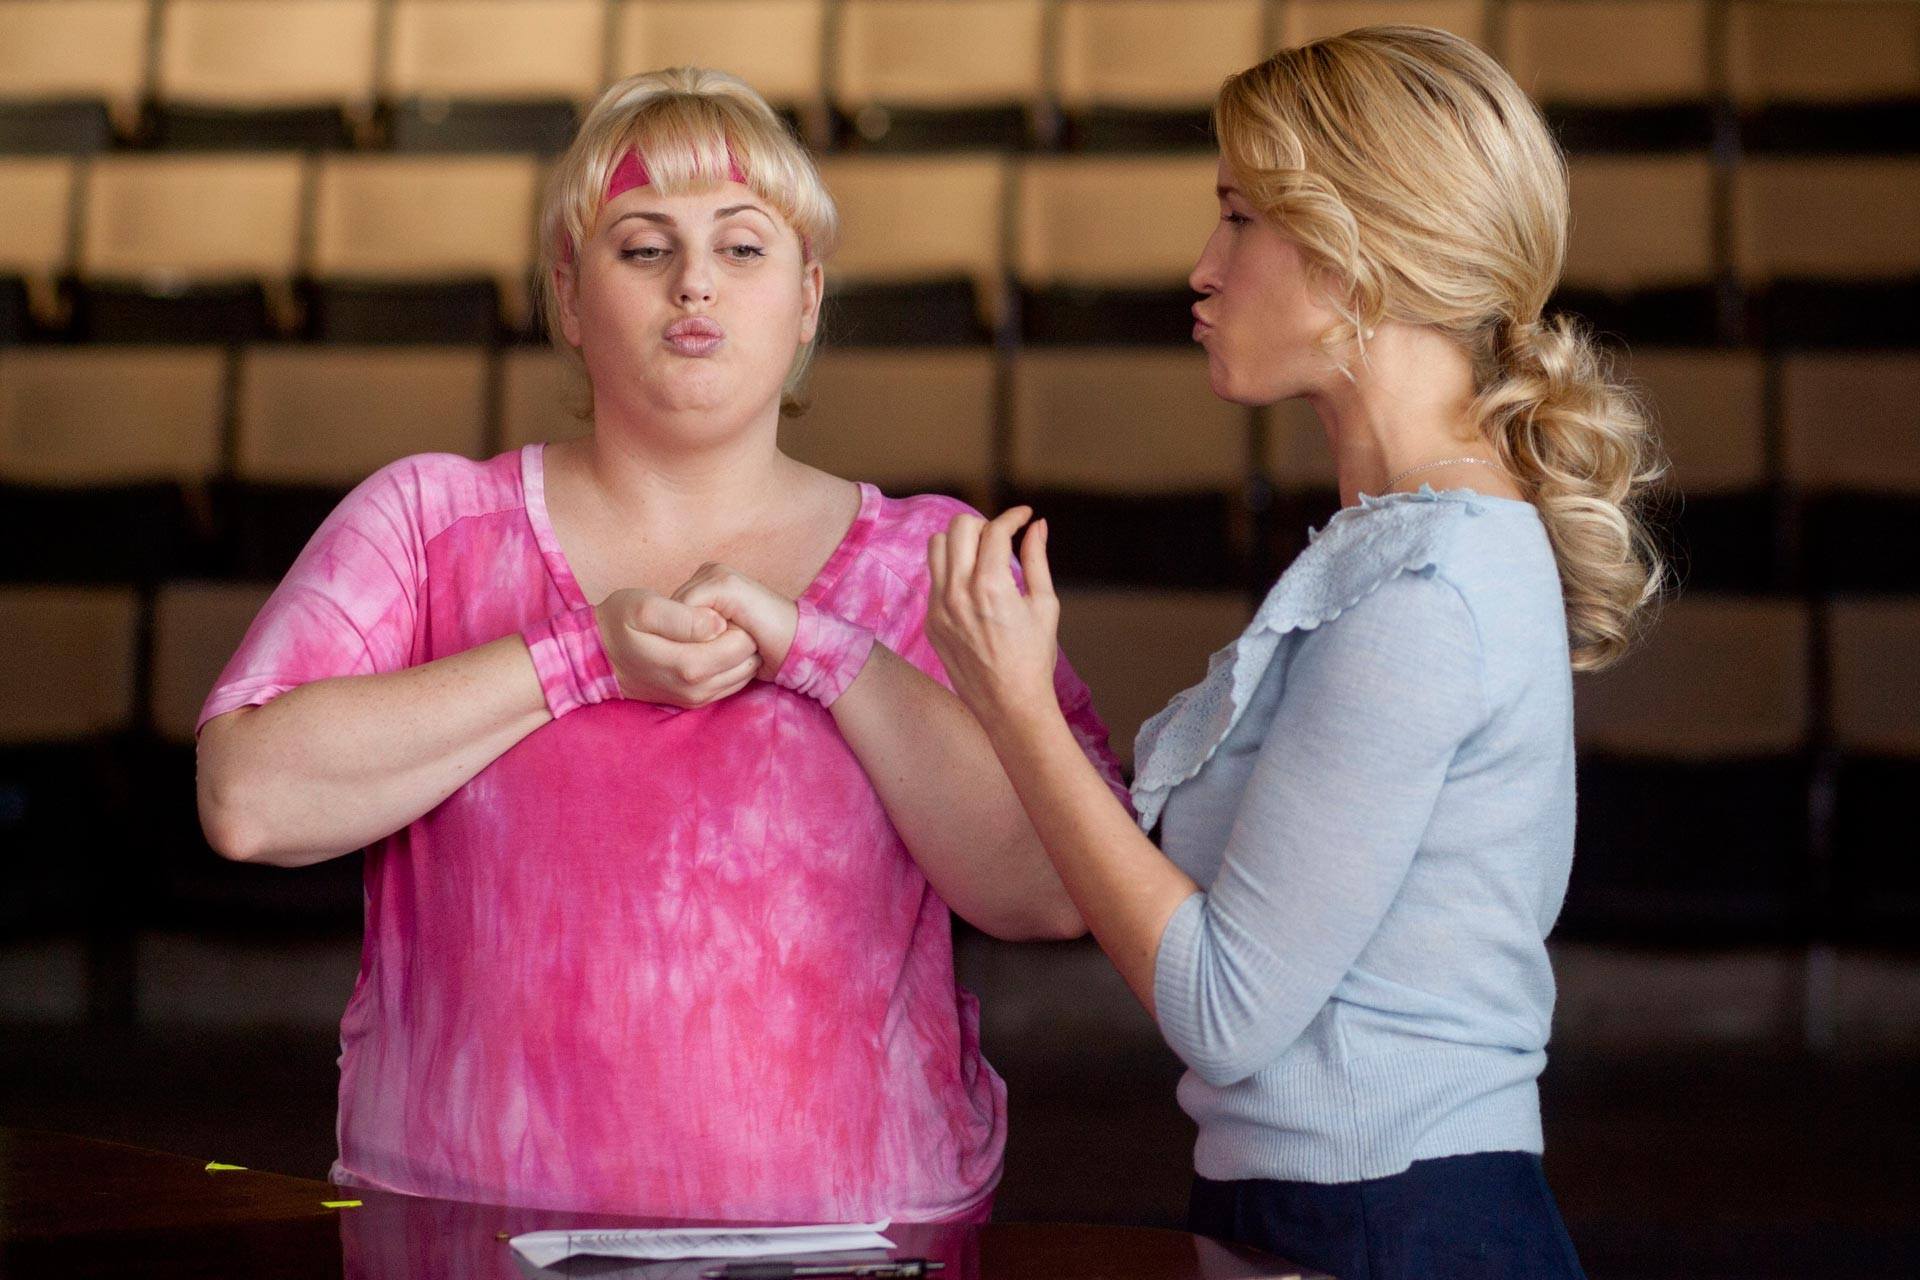 5 Positive Truths Only Plus-Sized People Would Understand